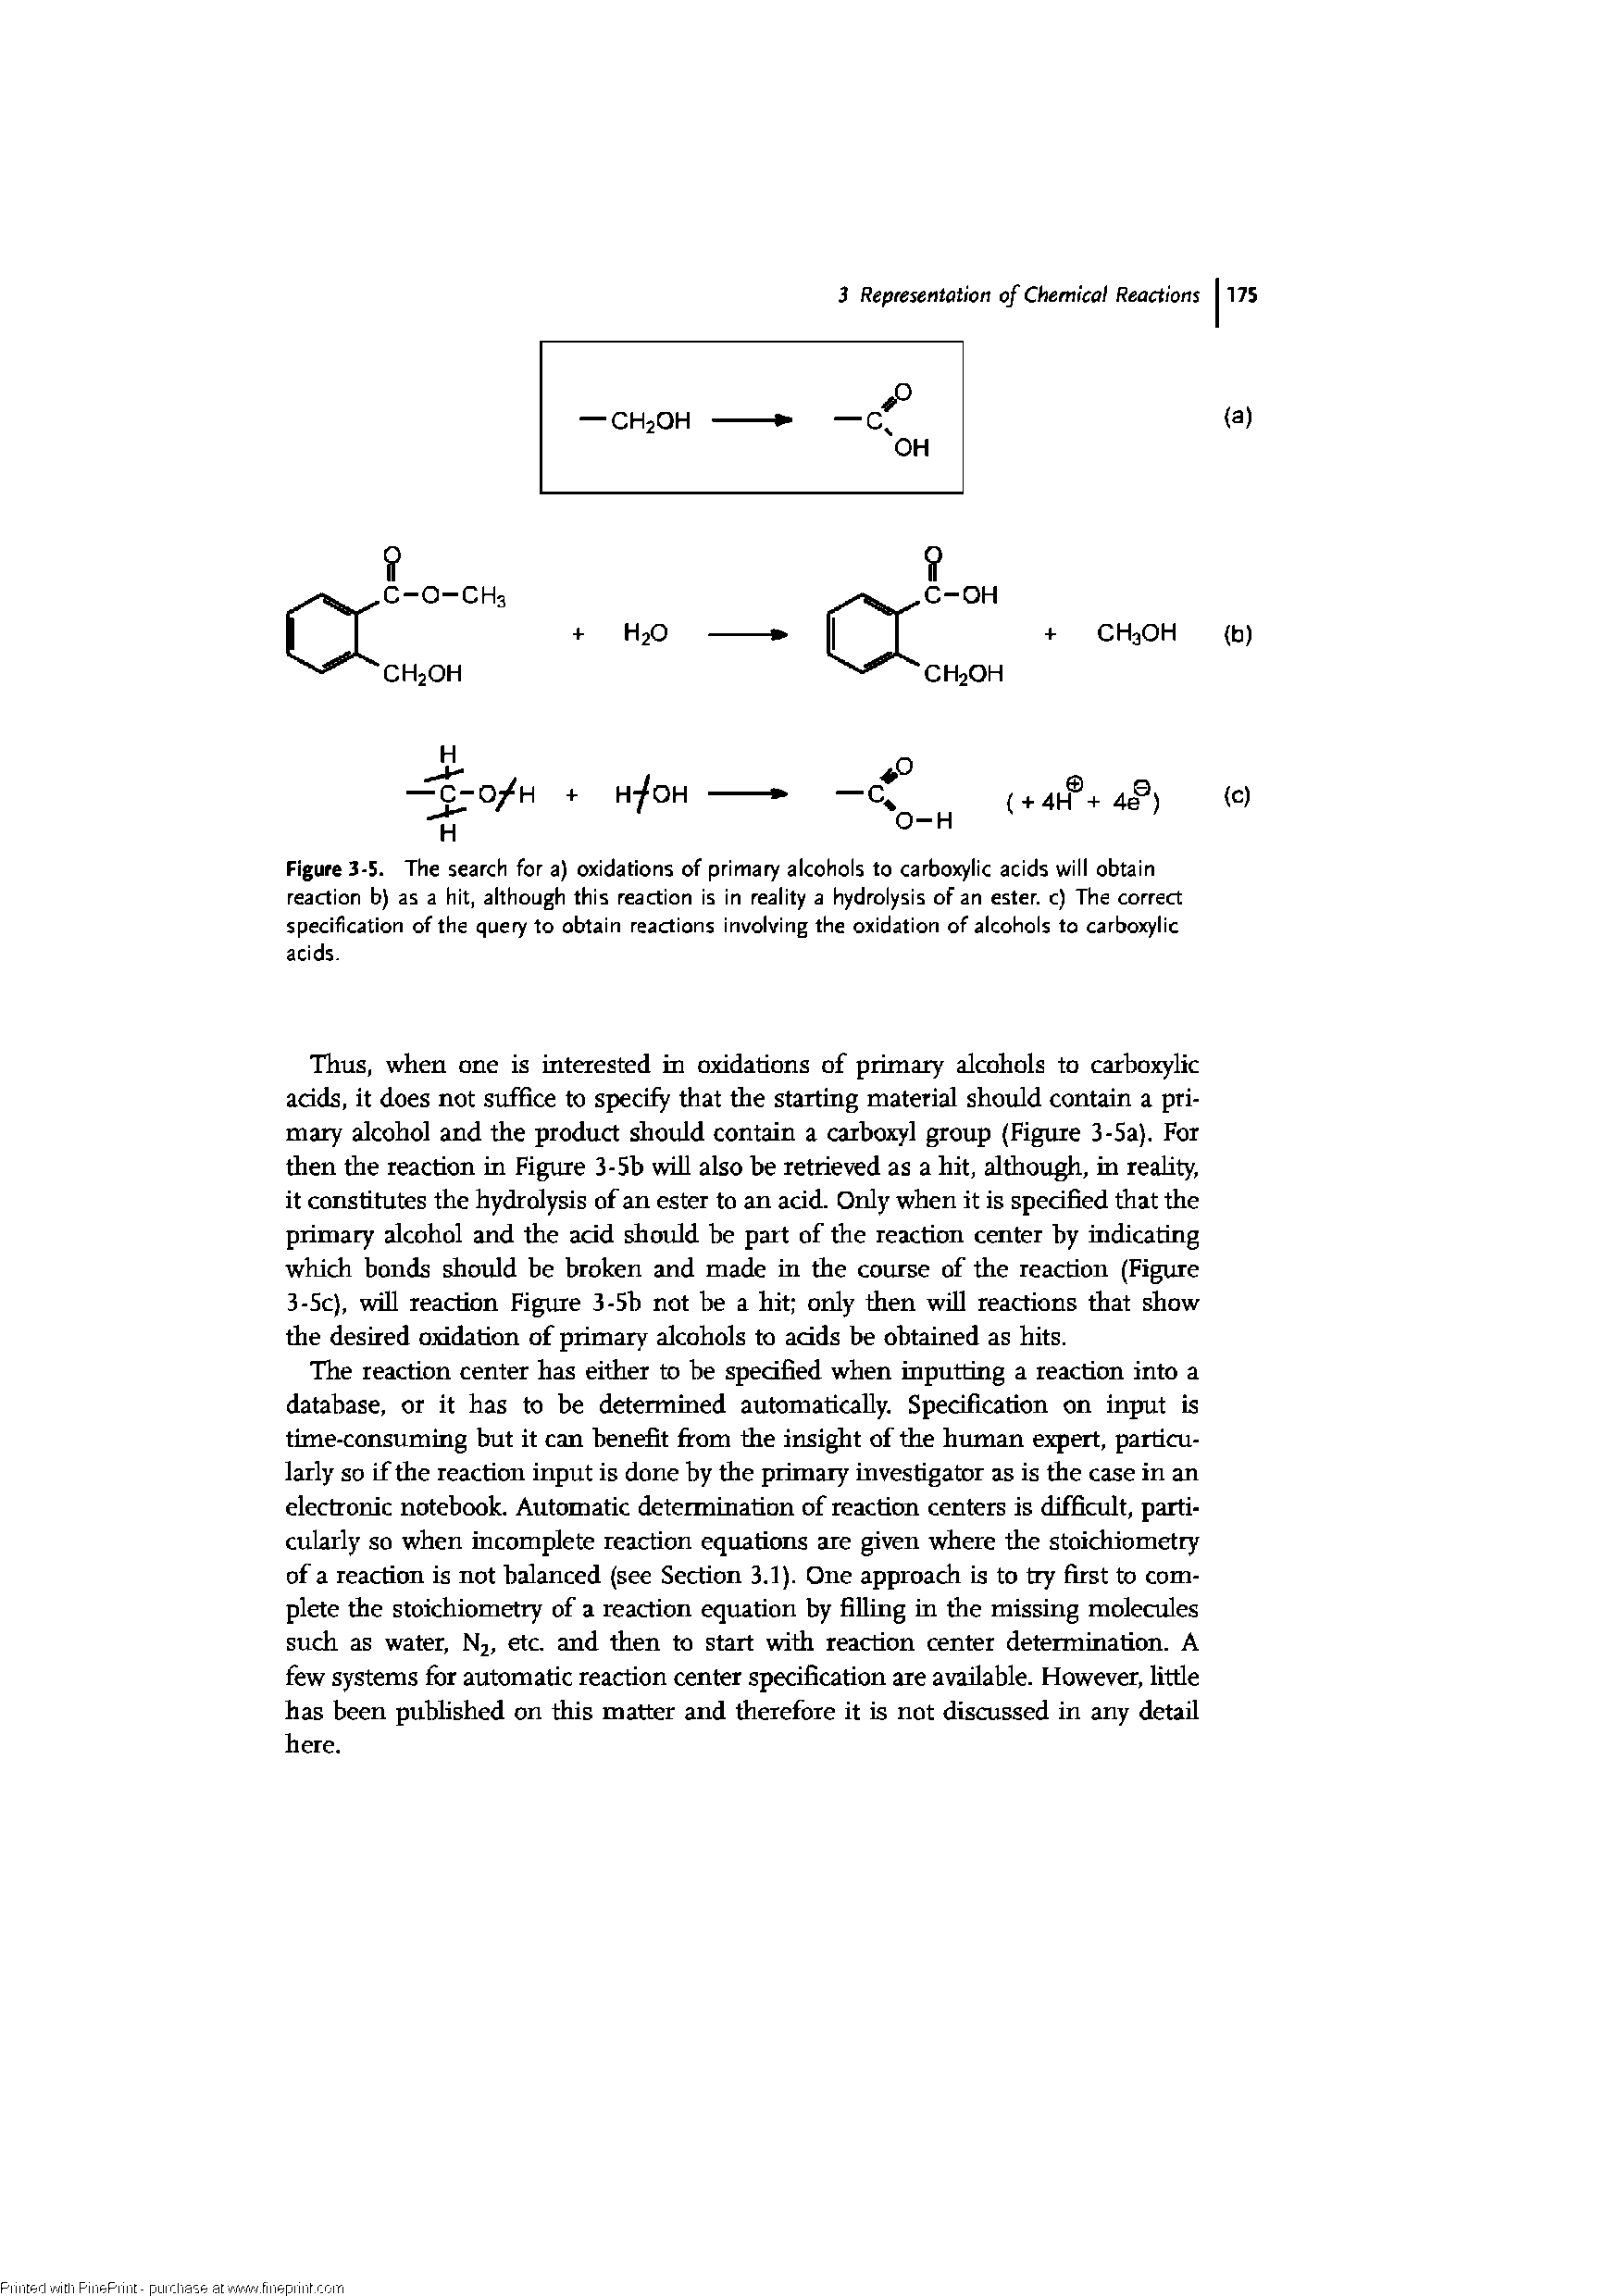 Figure 3-5. The search for a) oxidations of primary alcohols to carboxylic acids will obtain reaction b) as a hit, although this reaction is in reality a hydrolysis of an ester, c) The correct specification of the query to obtain reactions invoivingthe oxidation of aicohols to carboxyiic acids.